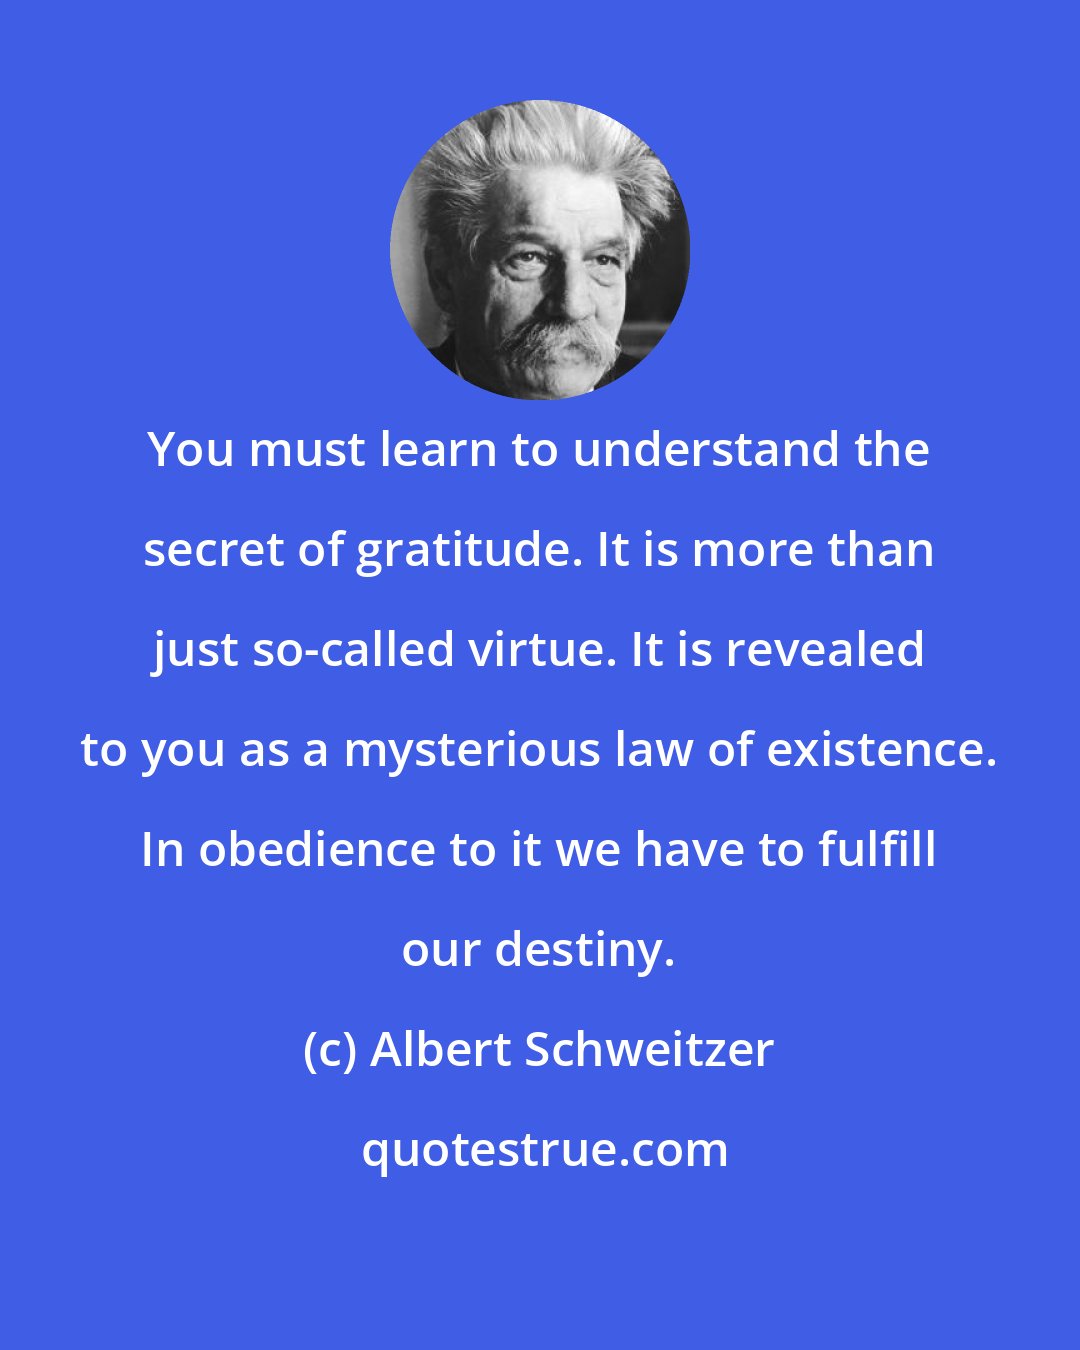 Albert Schweitzer: You must learn to understand the secret of gratitude. It is more than just so-called virtue. It is revealed to you as a mysterious law of existence. In obedience to it we have to fulfill our destiny.